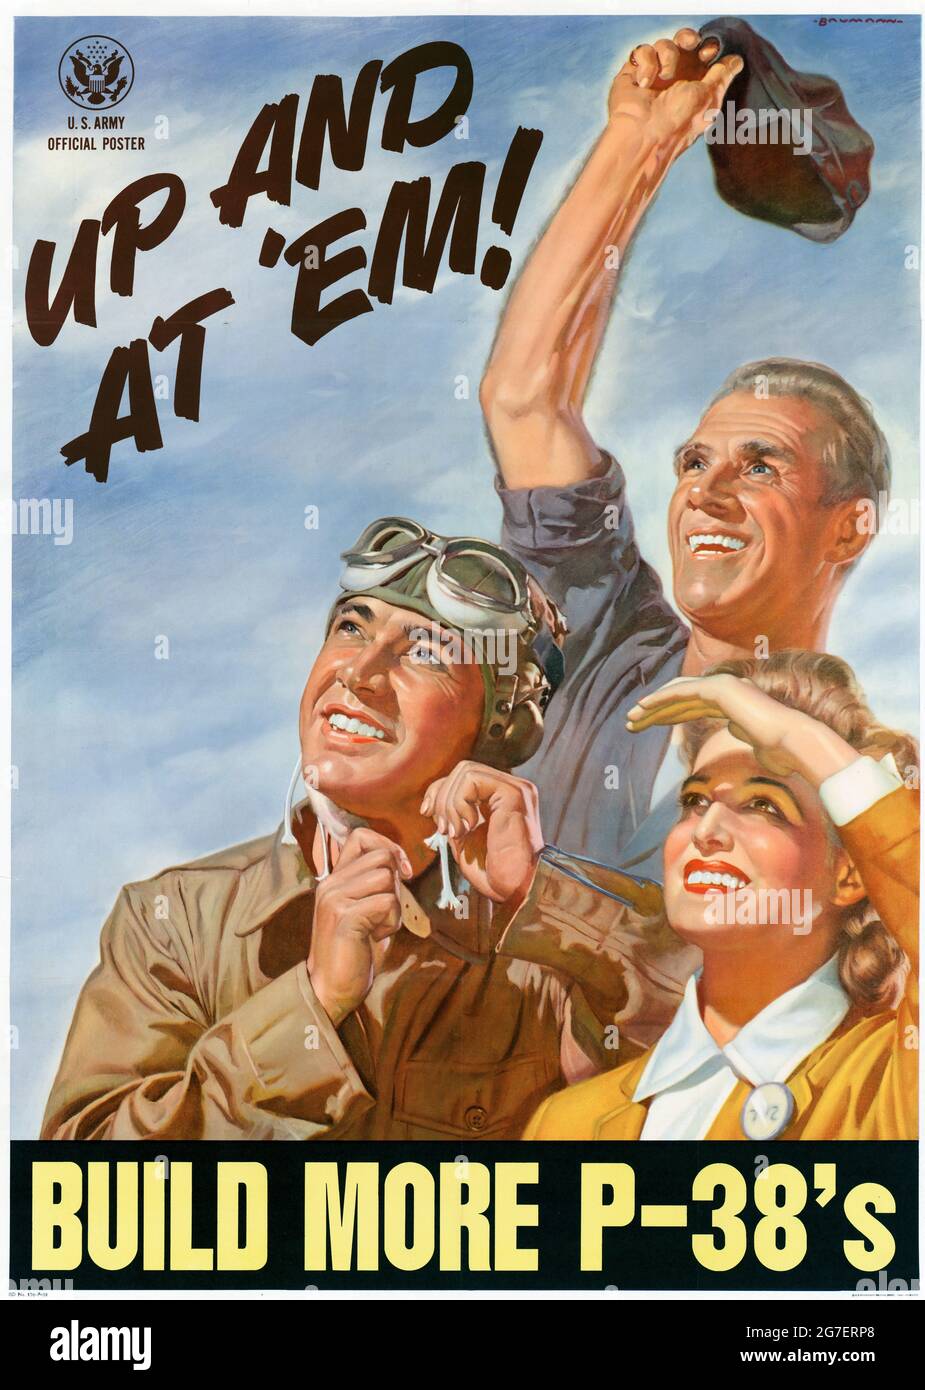 Up and at 'em - build more P-38s - World war II American Home Front Poster Stockfoto